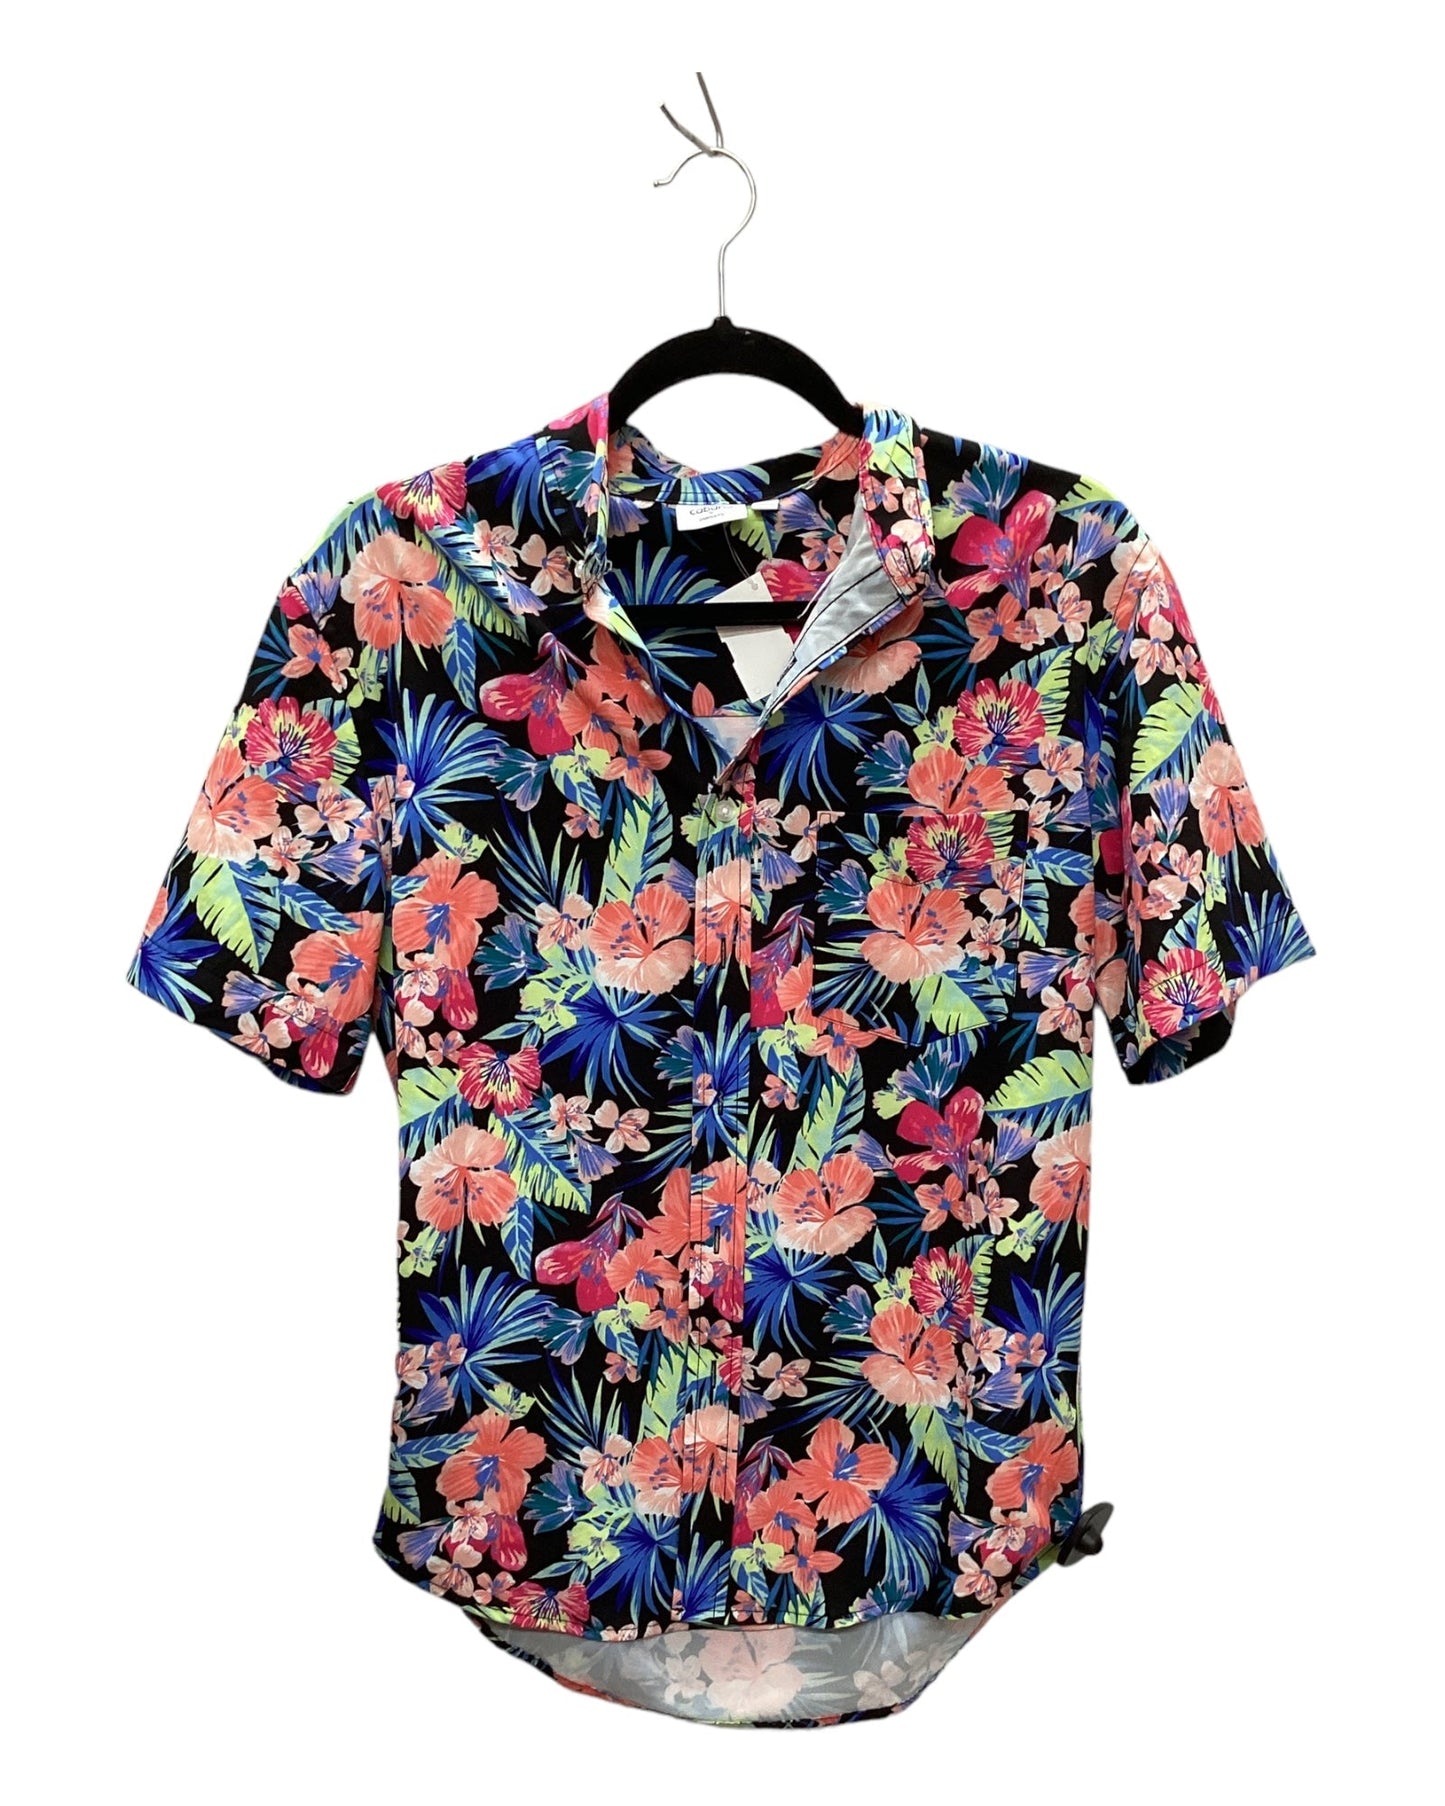 Tropical Print Top Short Sleeve Crown And Ivy, Size S